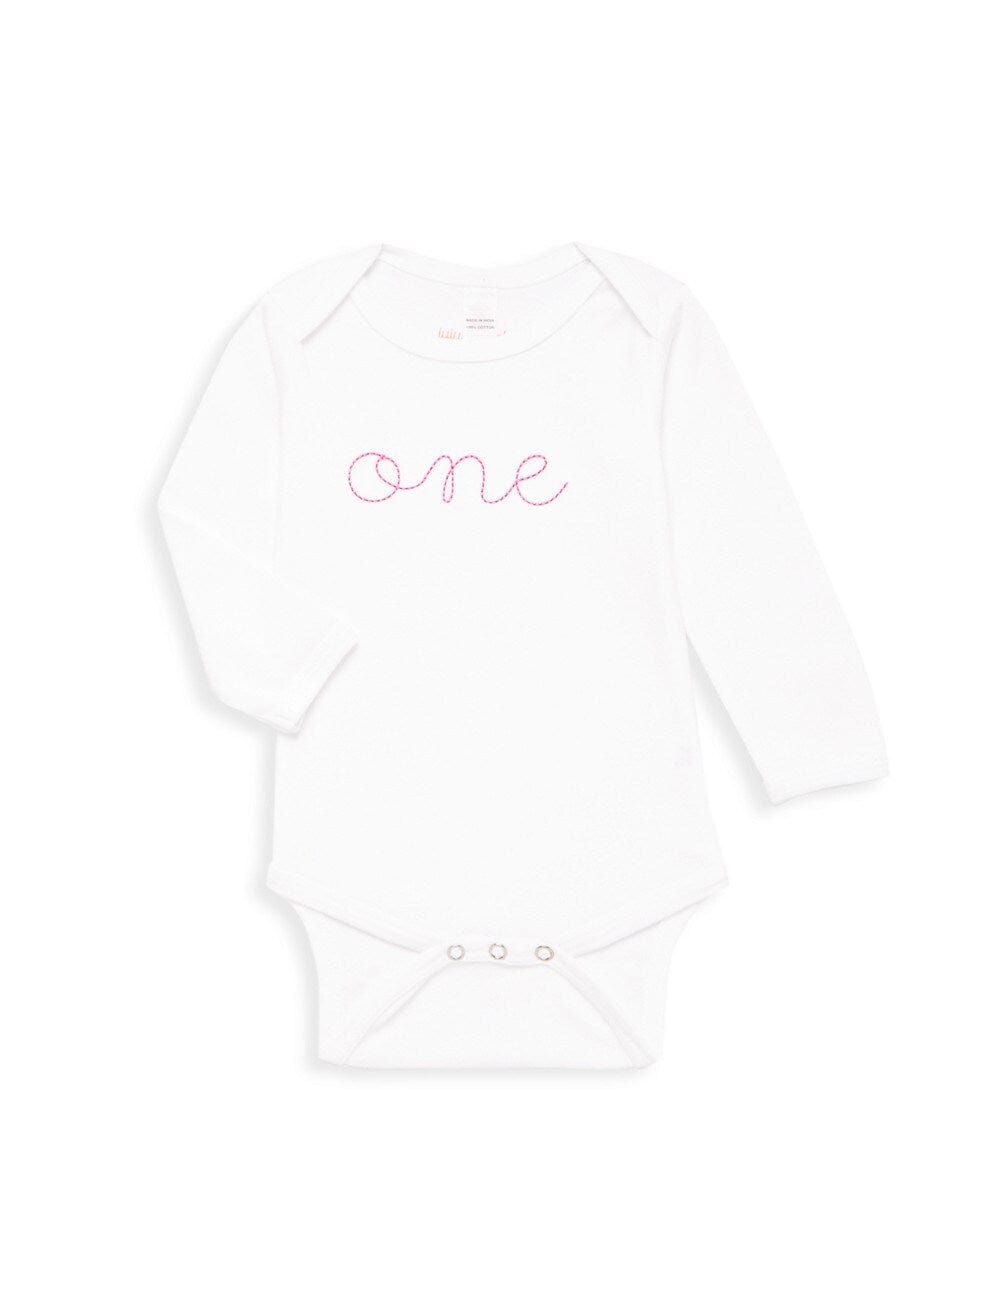 juju + stitch Personalized Custom Embroidered Baby & Toddler 12m / Gold "one" Baby Longsleeve Onesie